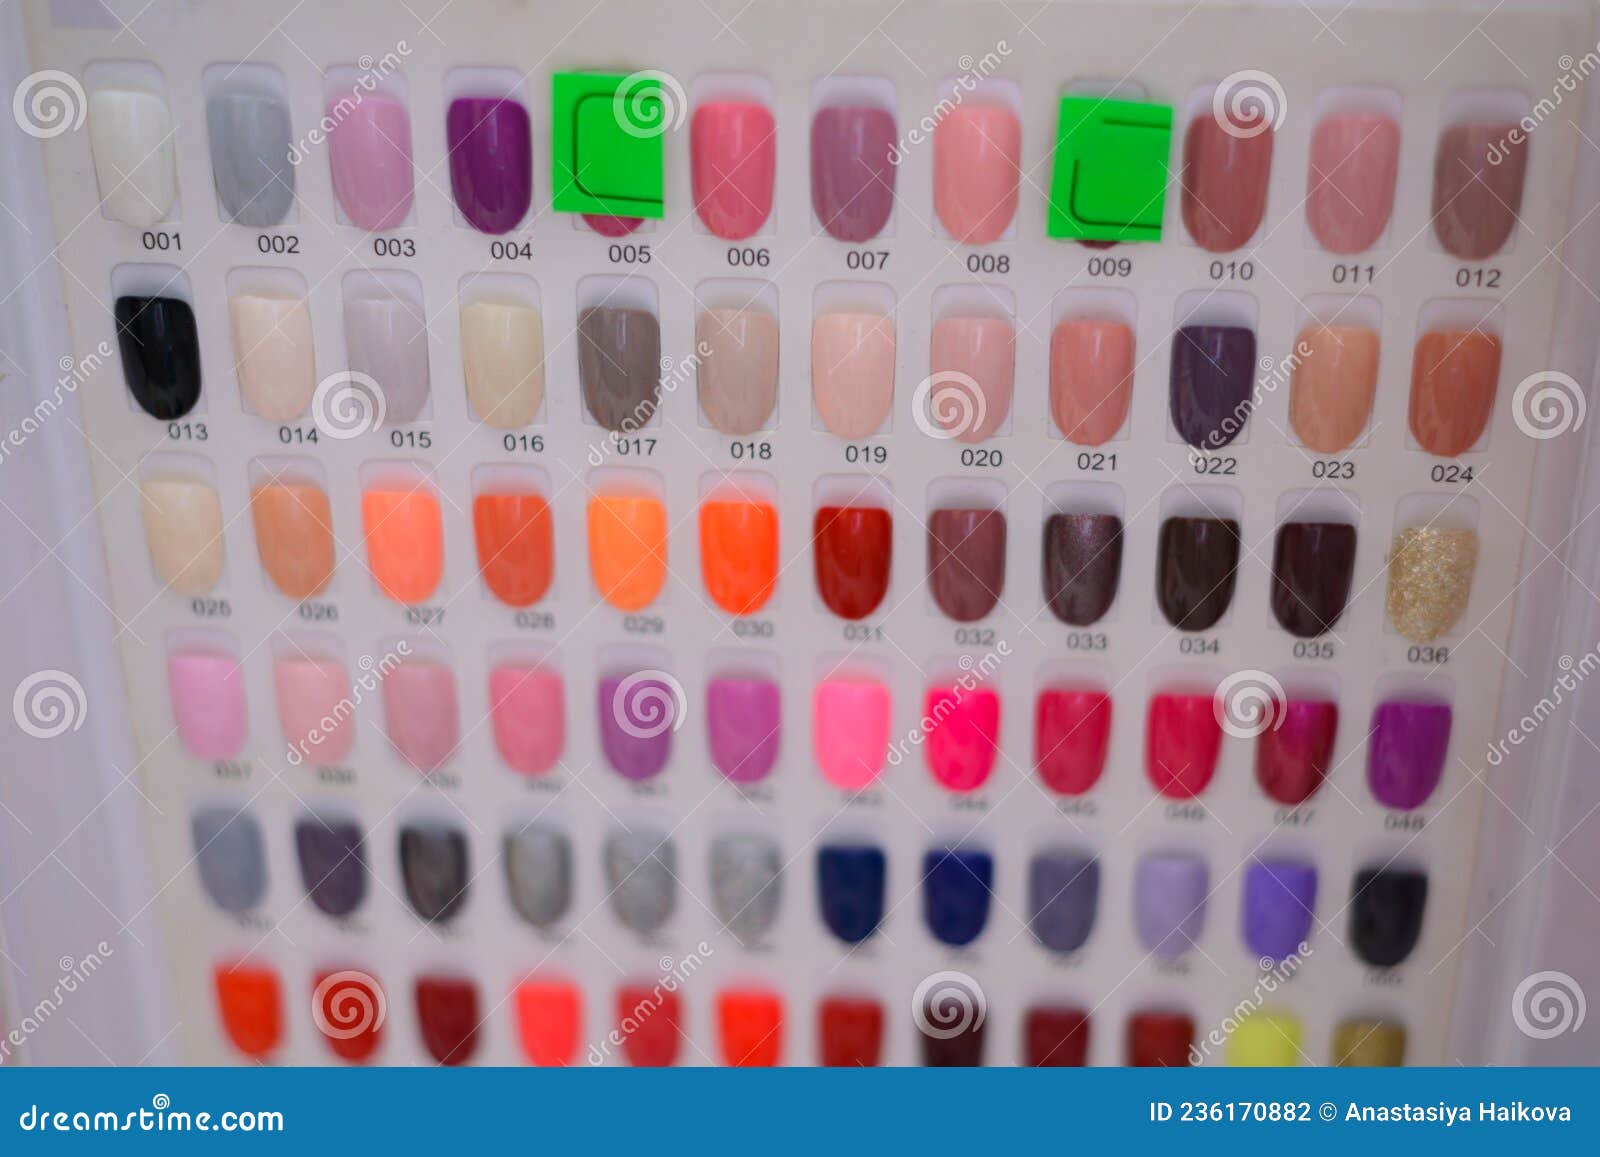 Counter in the Mall with a Product for Nail Service, Palettes with ...